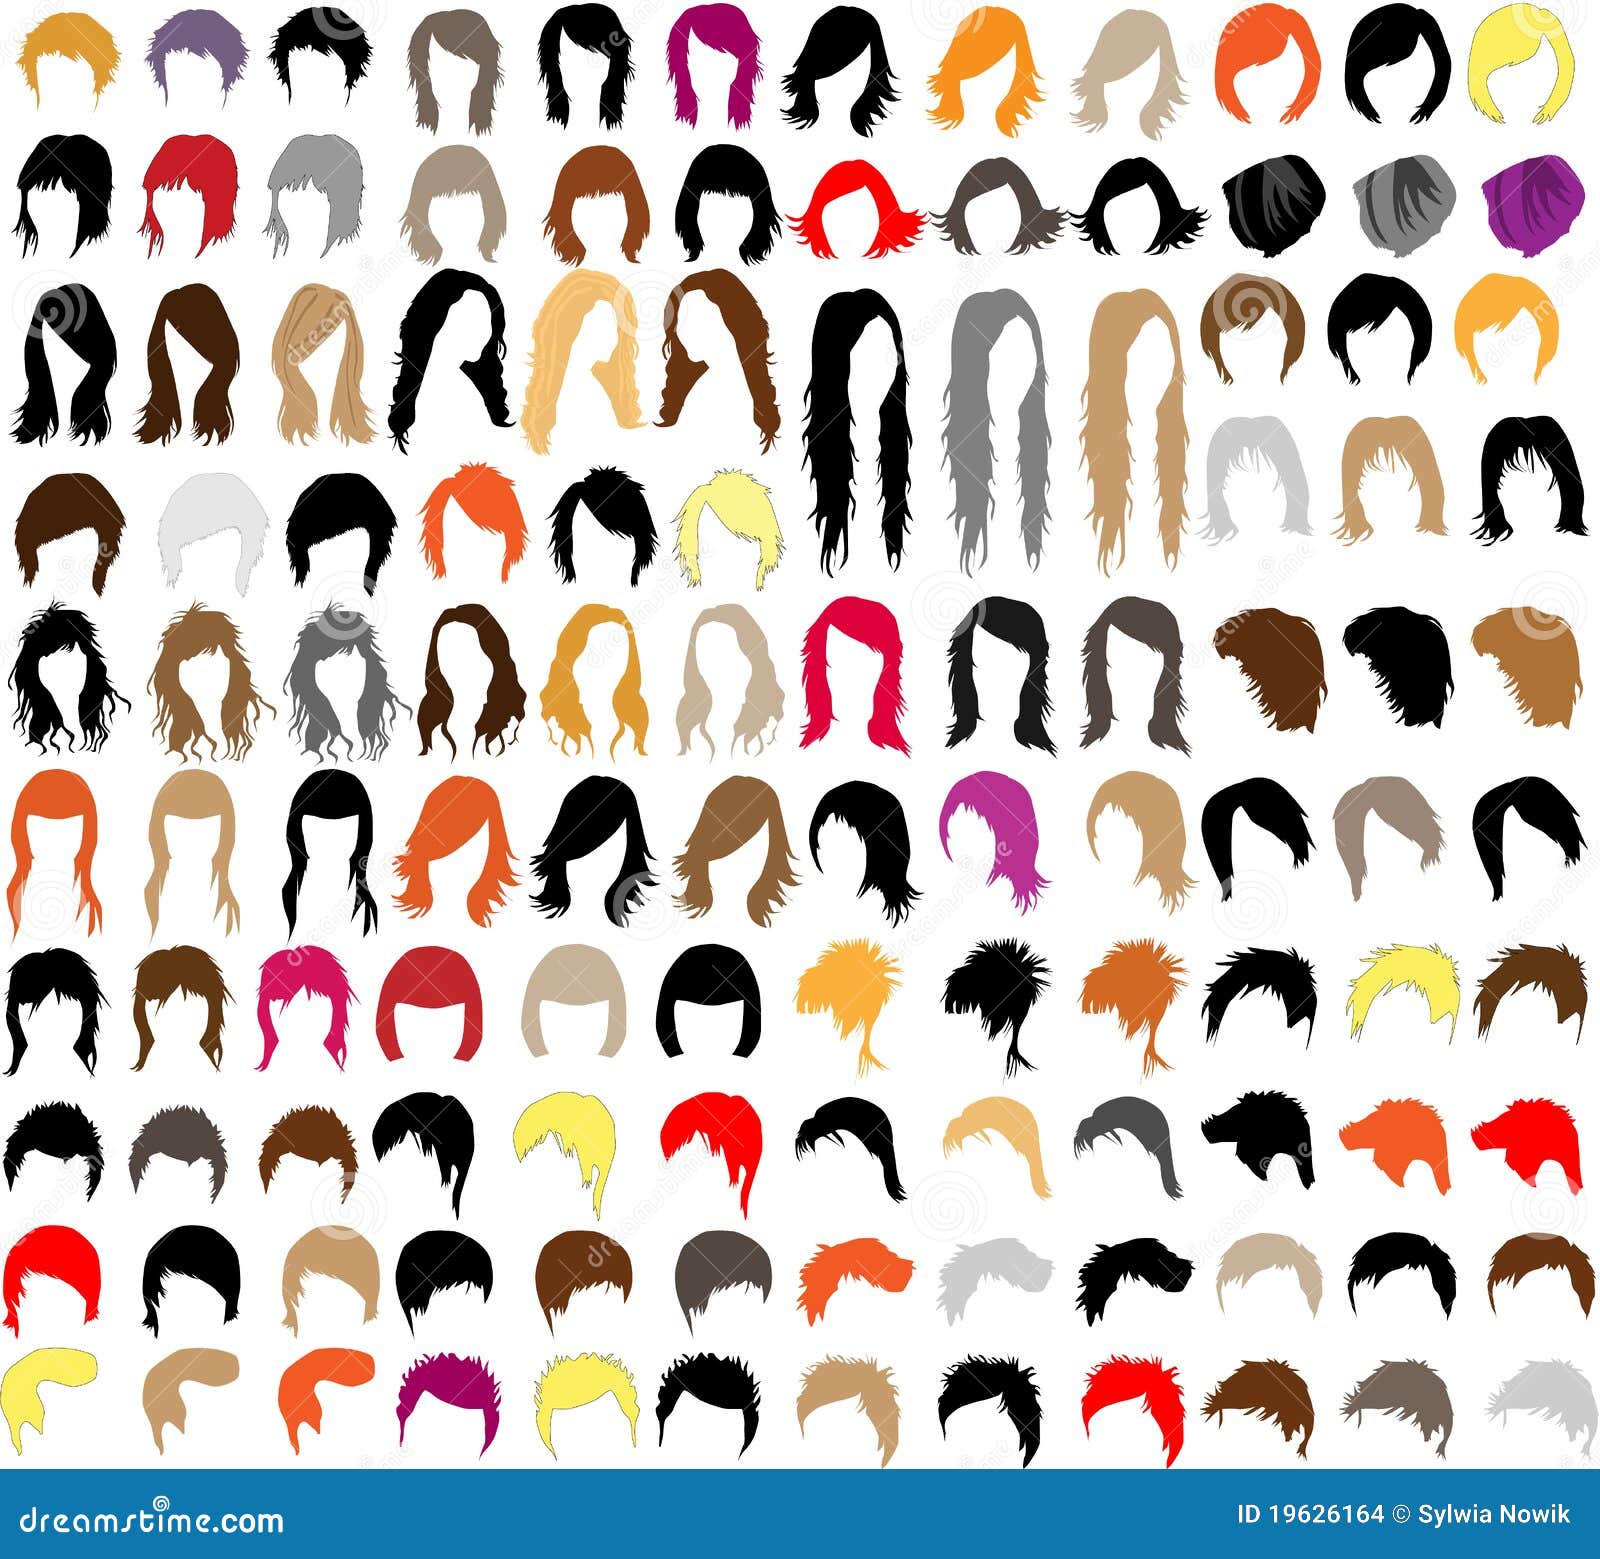 clipart hairstyles - photo #45